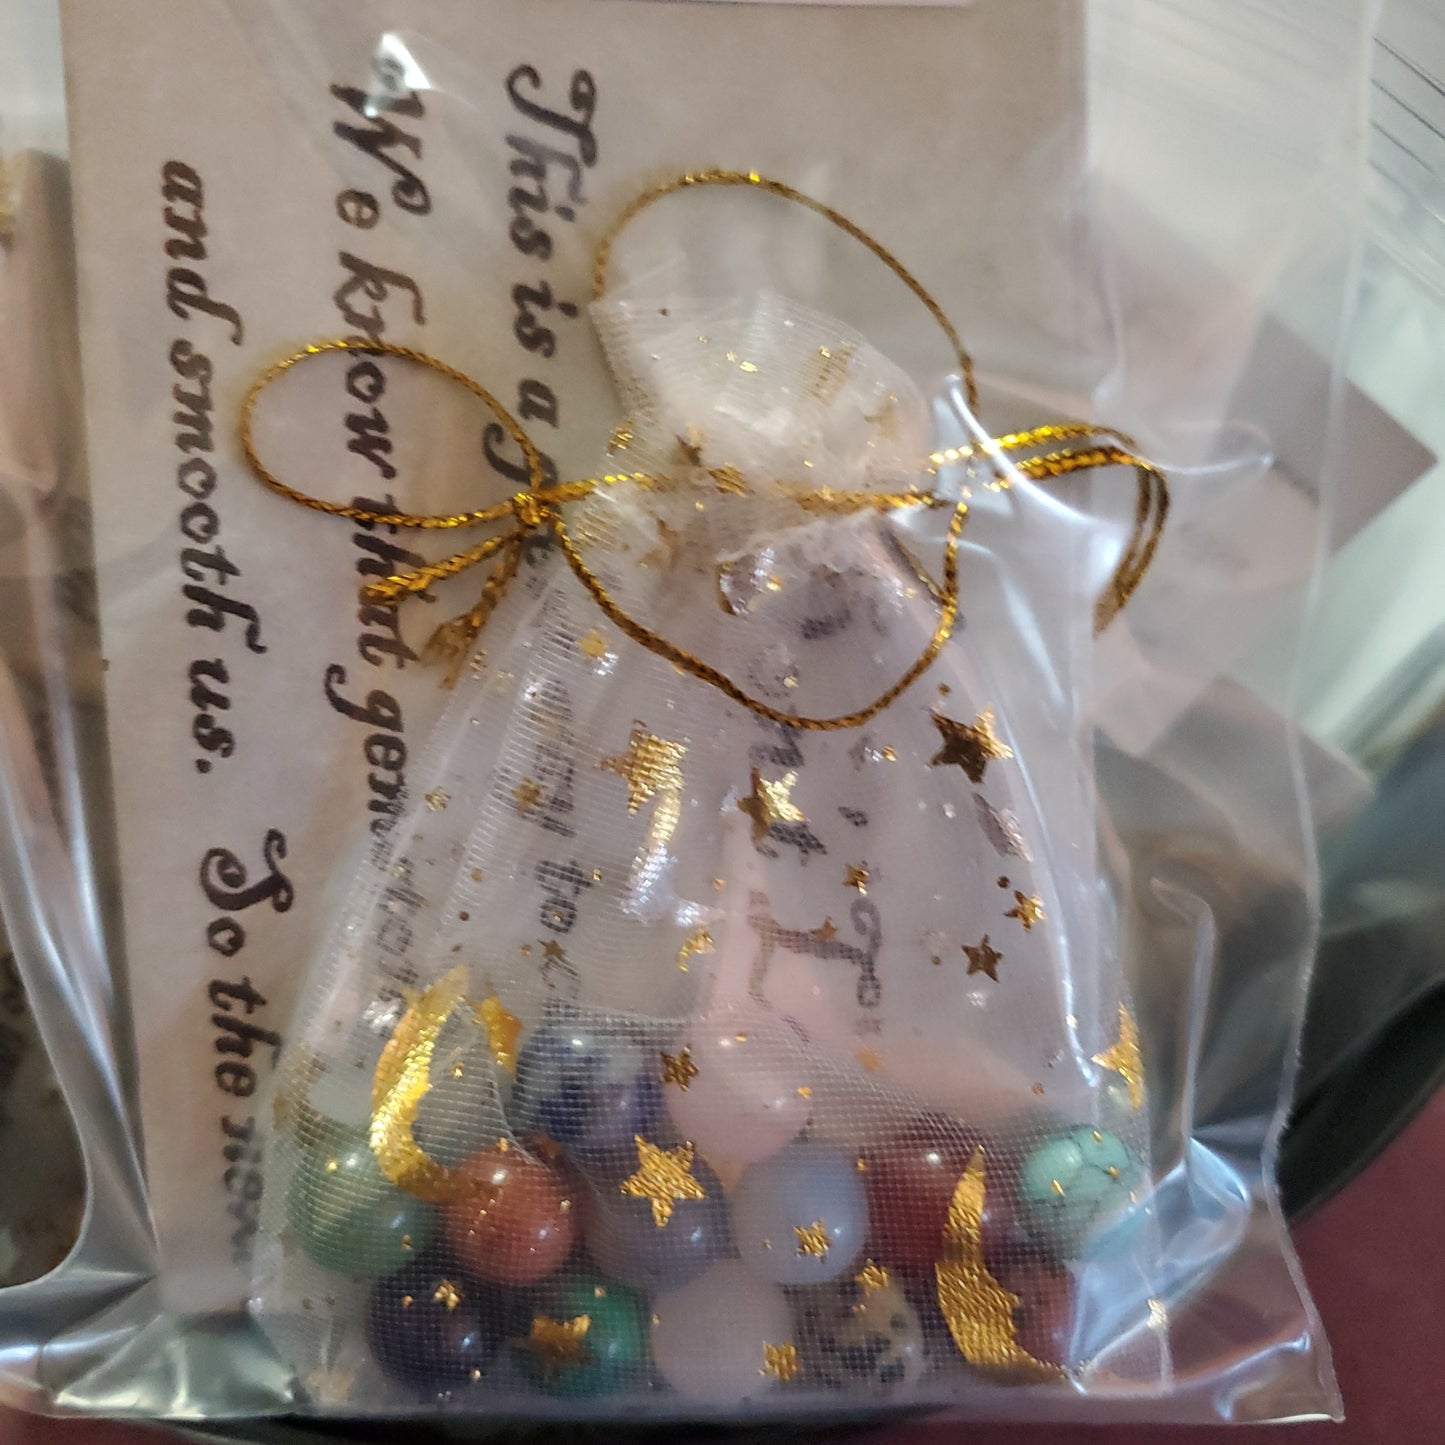 Don't lose your marbles gift set